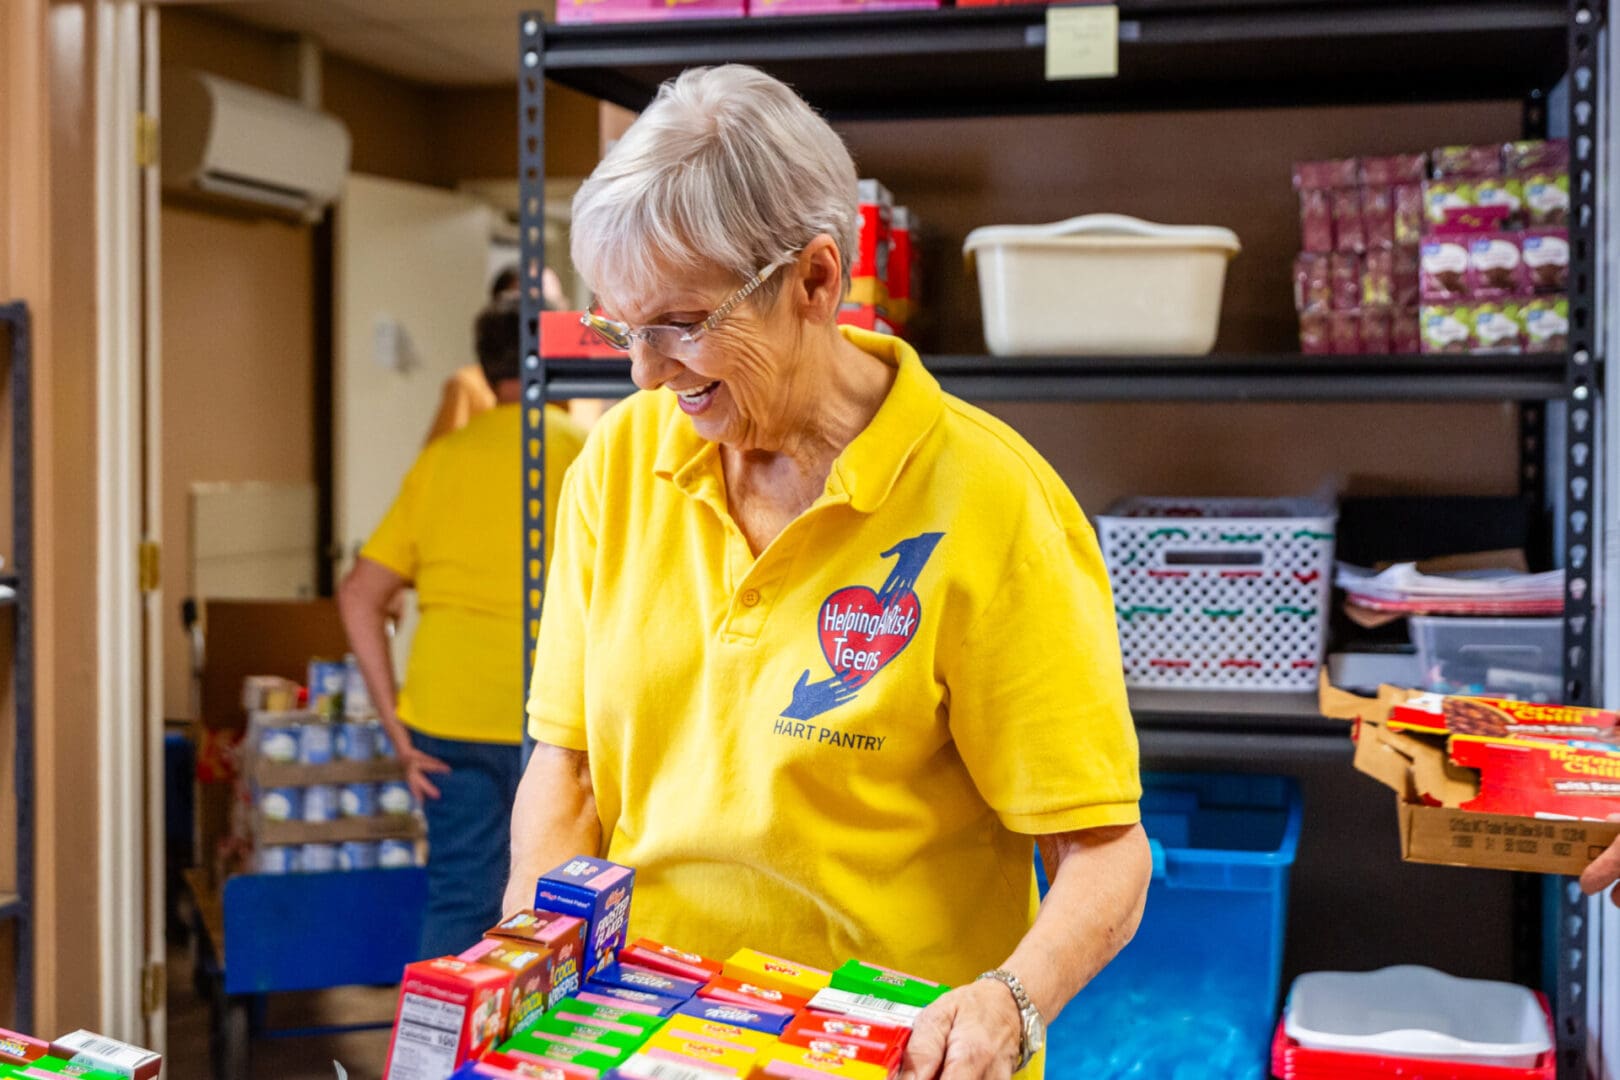 A woman in yellow shirt holding boxes of food.